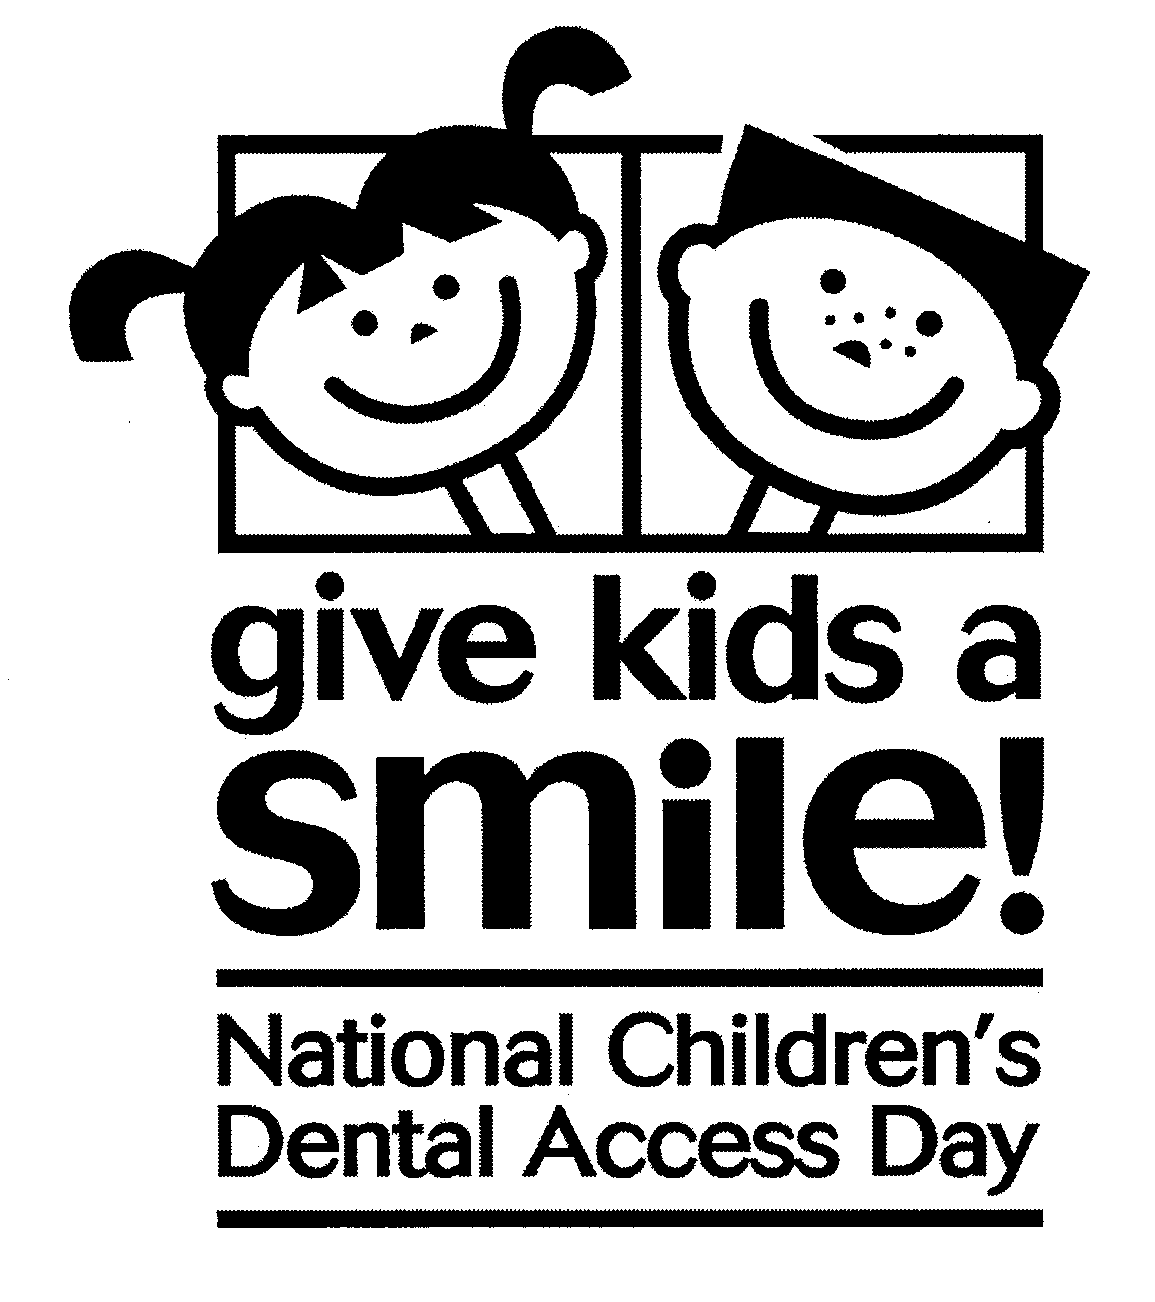  GIVE KIDS A SMILE! NATIONAL CHILDREN'S DENTAL ACCESS DAY